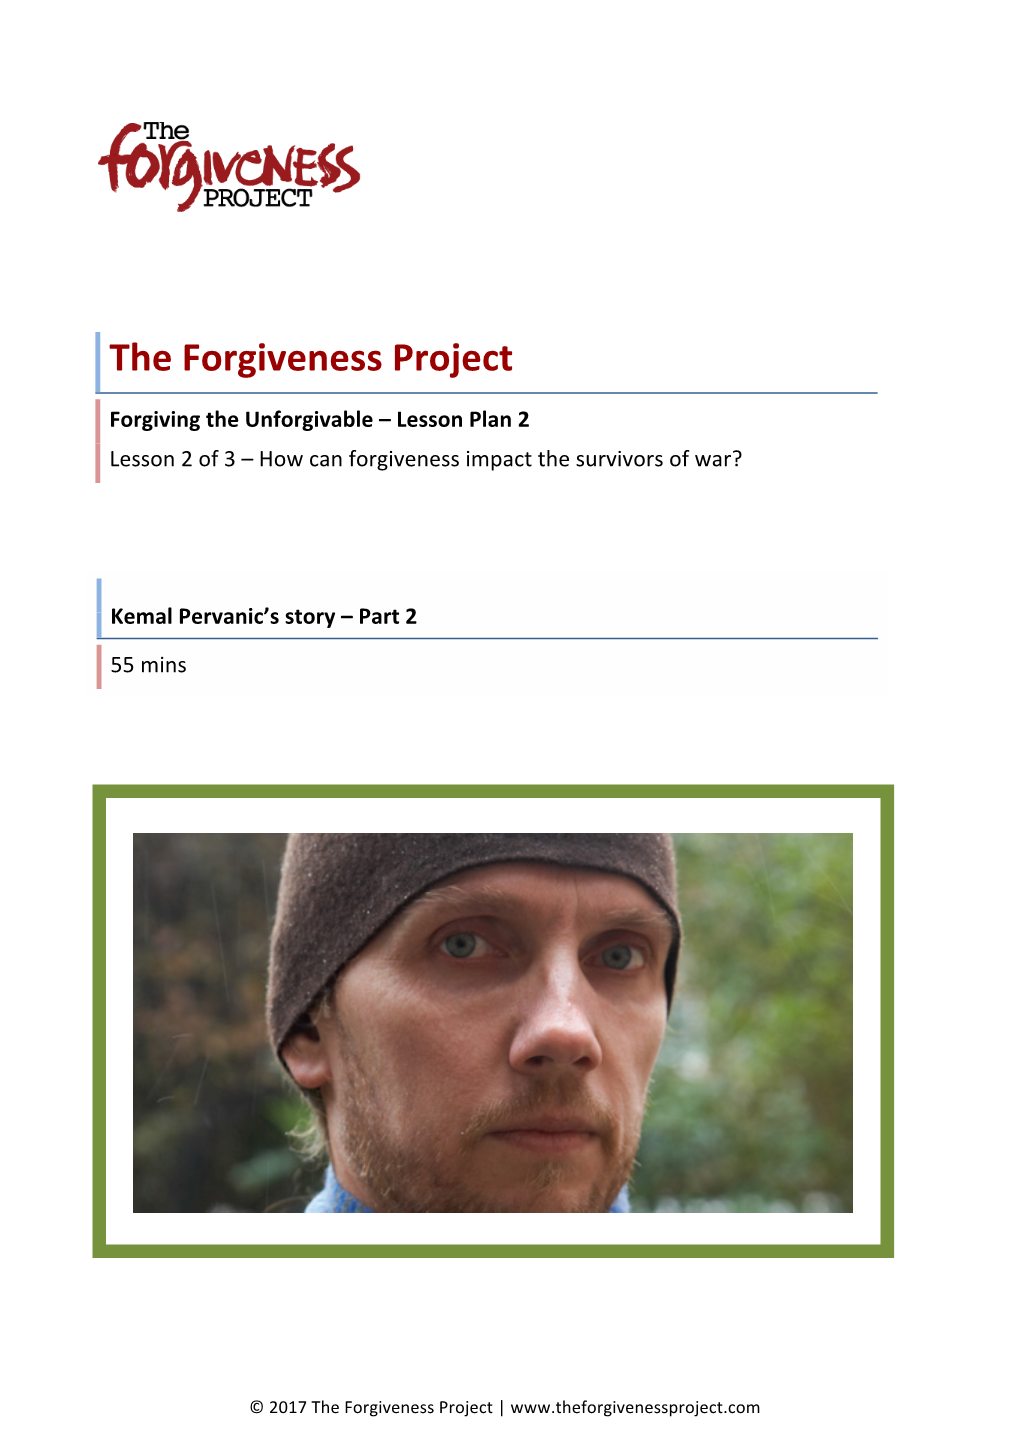 Lesson Plan 2 Lesson 2 of 3 – How Can Forgiveness Impact the Survivors of War?